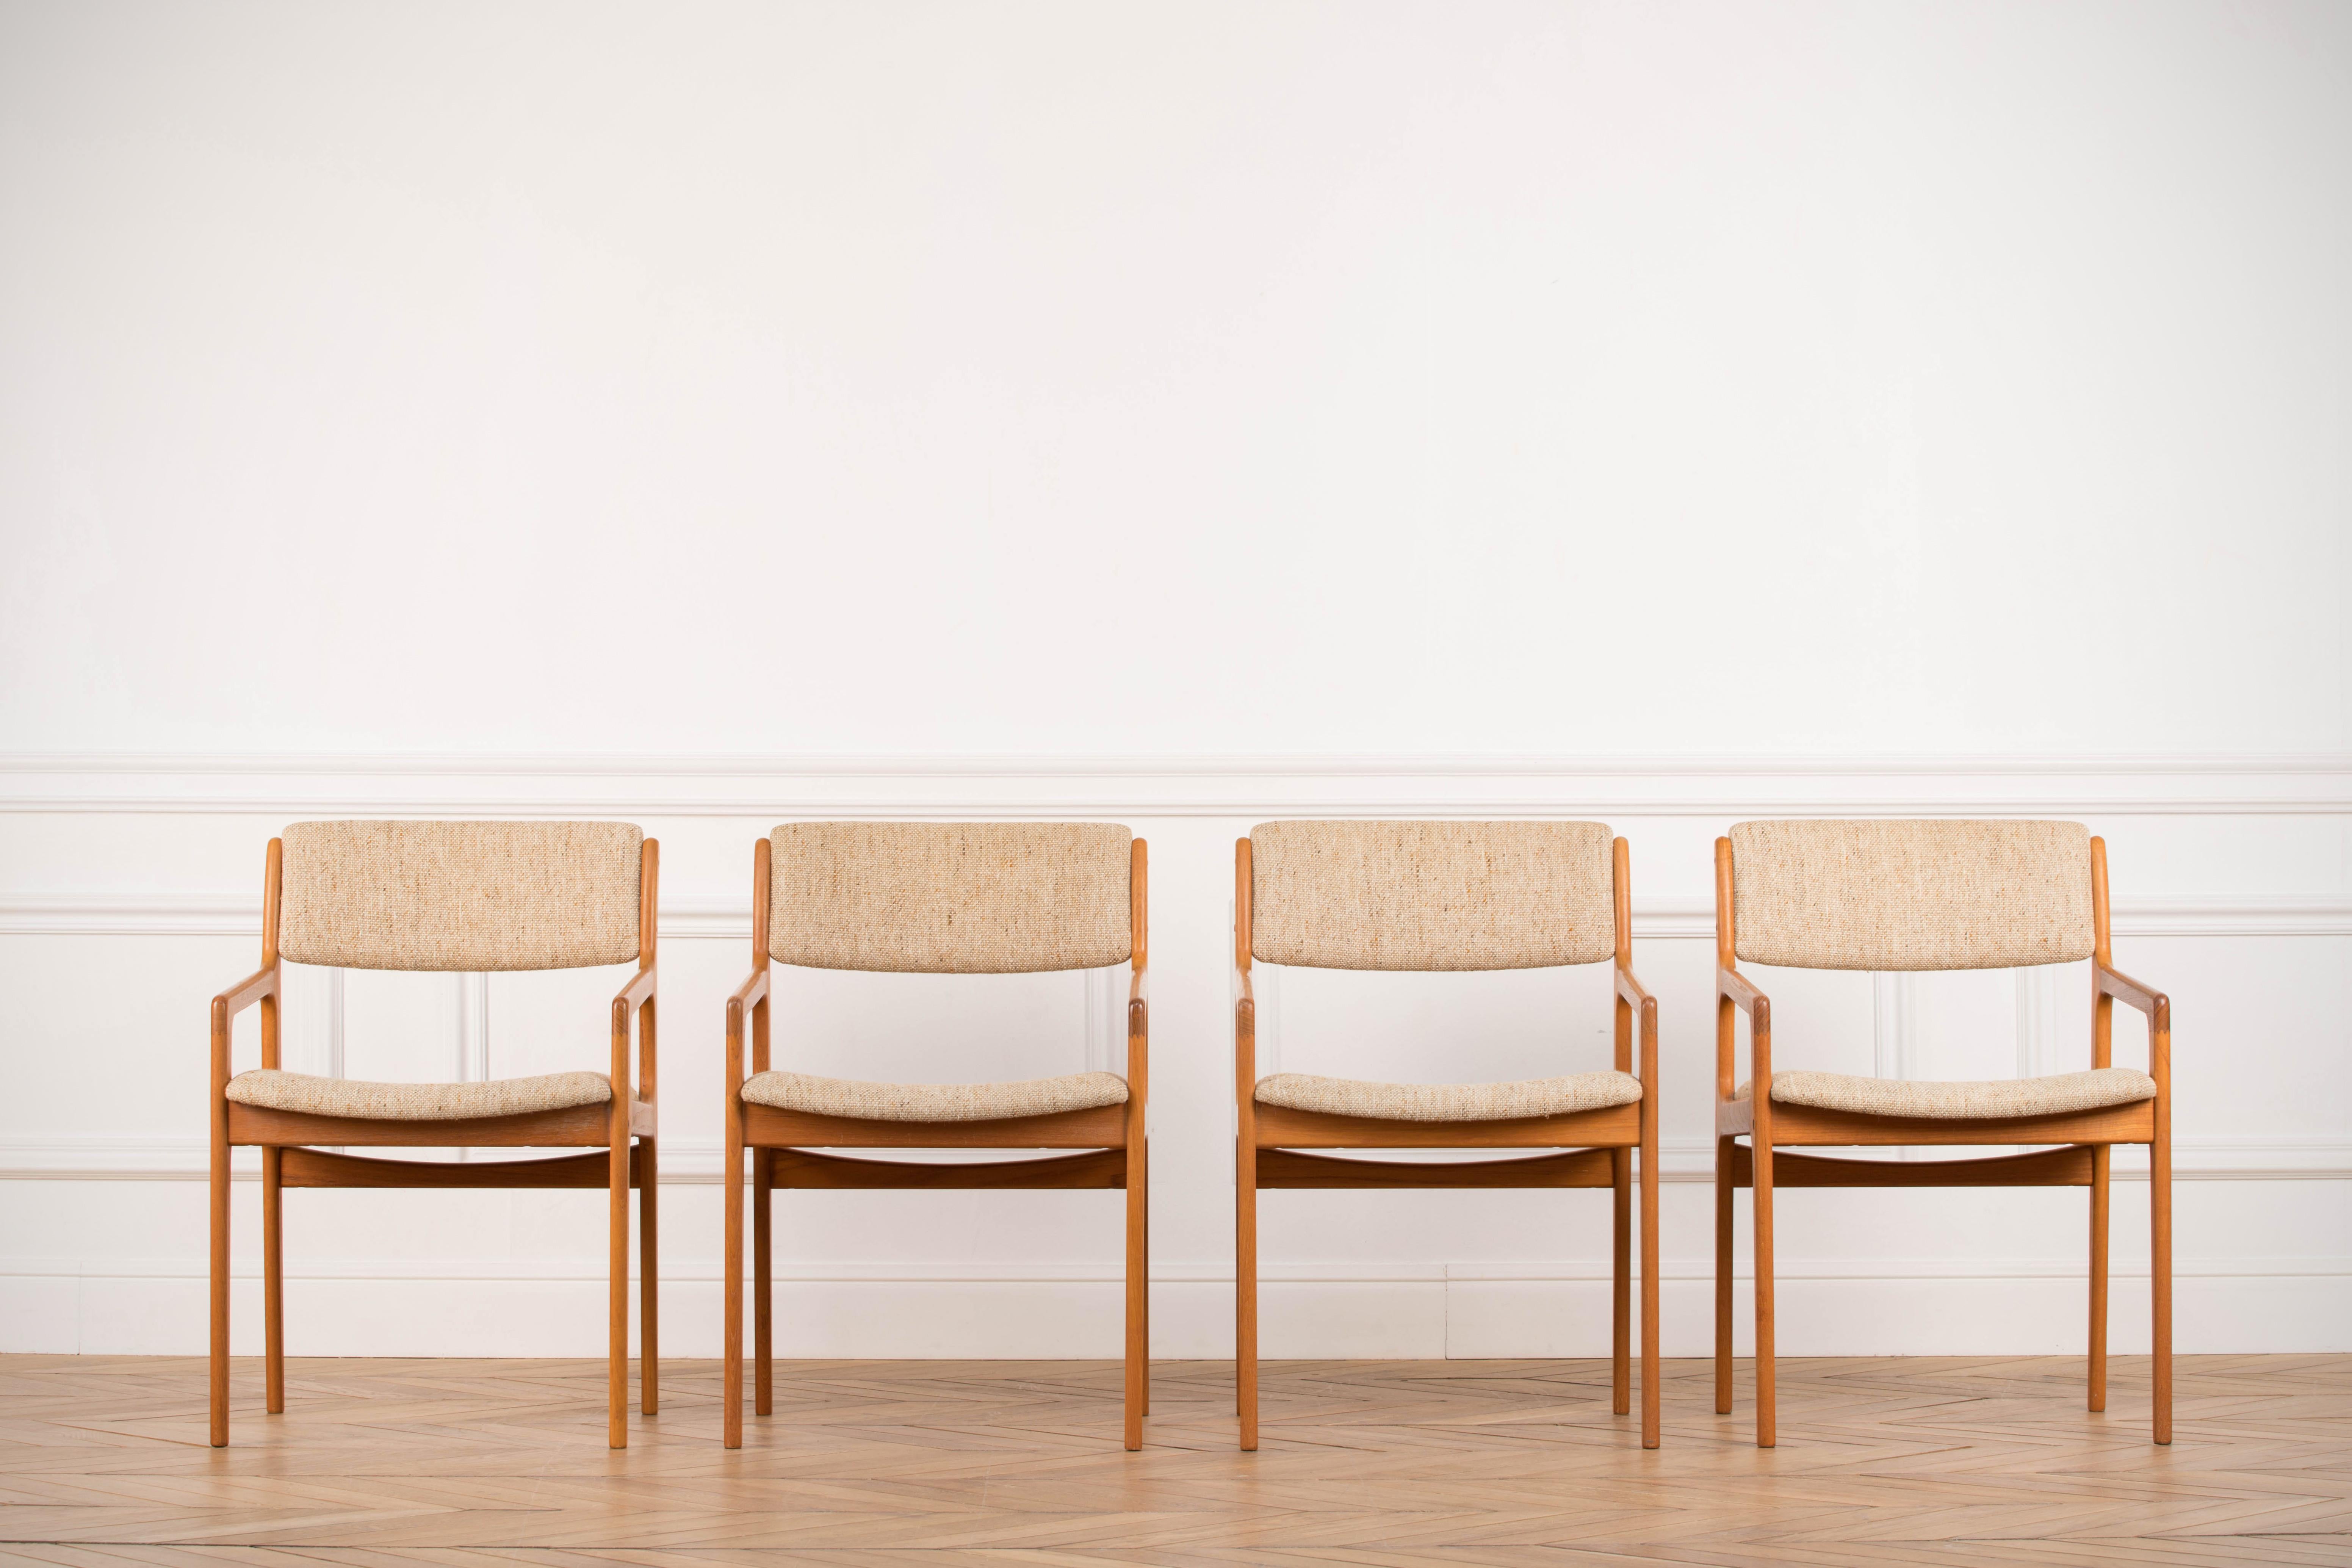 Set of four Danish chairs from the 1960s, made of teak wood, cream wool upholstery. Preserved in good condition (small dings and scratches) - directly for use.